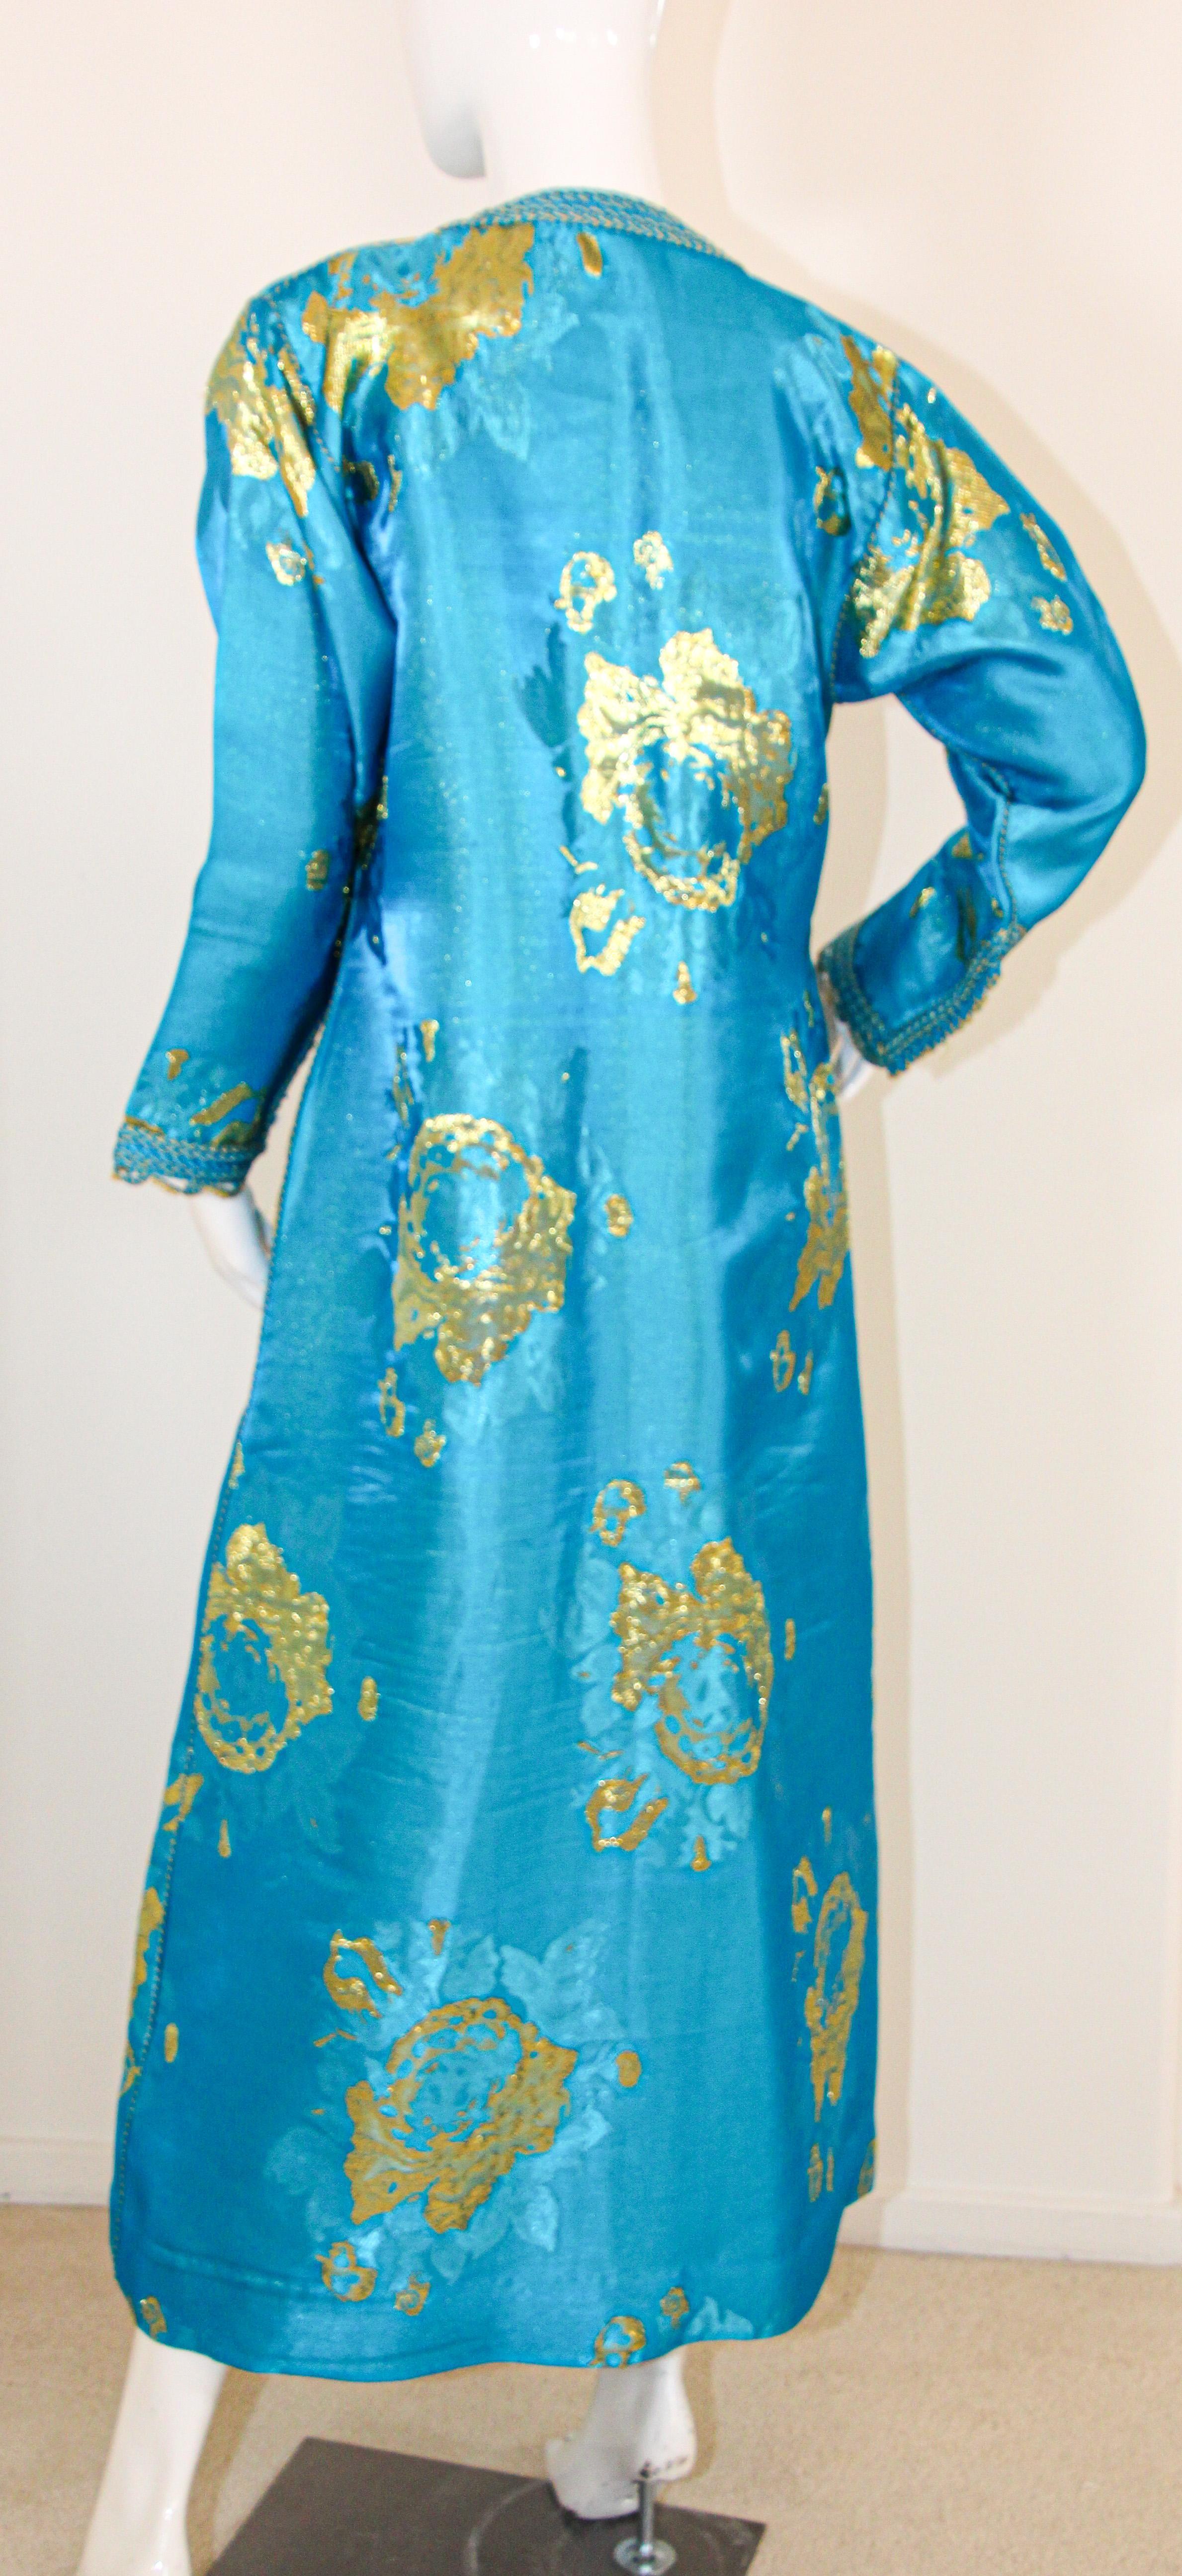 Moroccan Kaftan in Turquoise and Gold Floral Brocade Metallic Lame 6